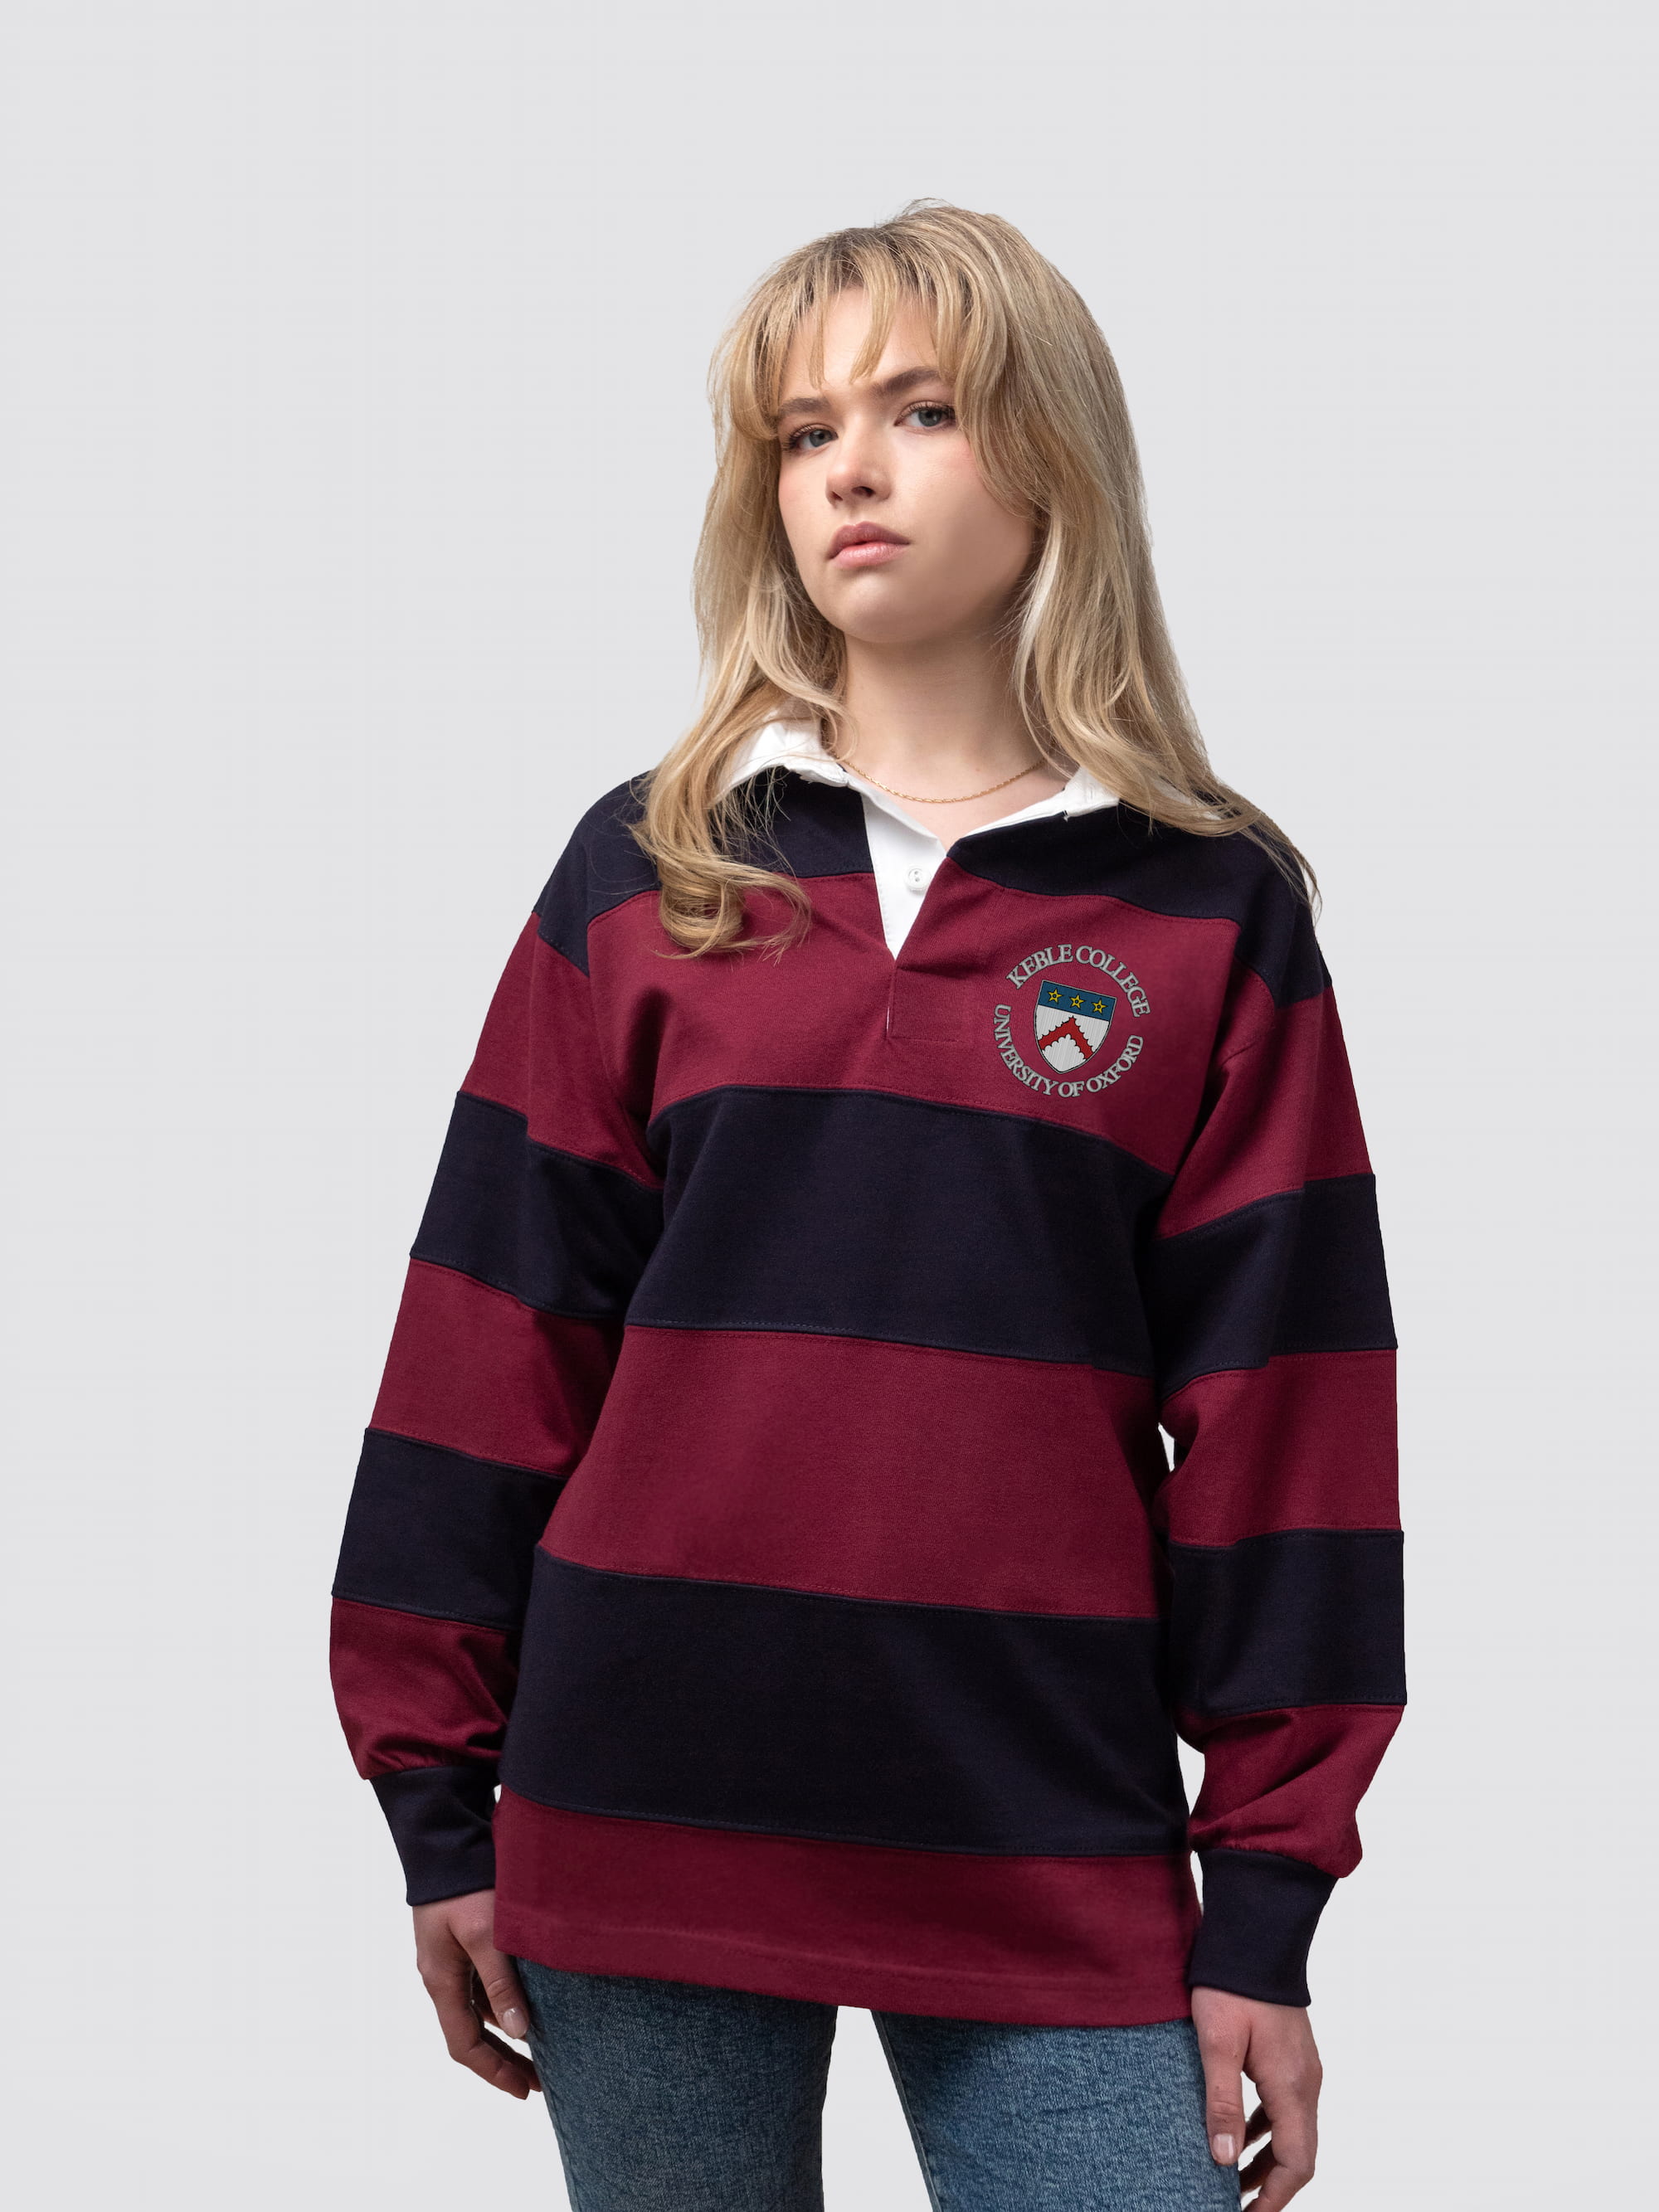 Keble College rugby shirt, with burgundy and navy stripes